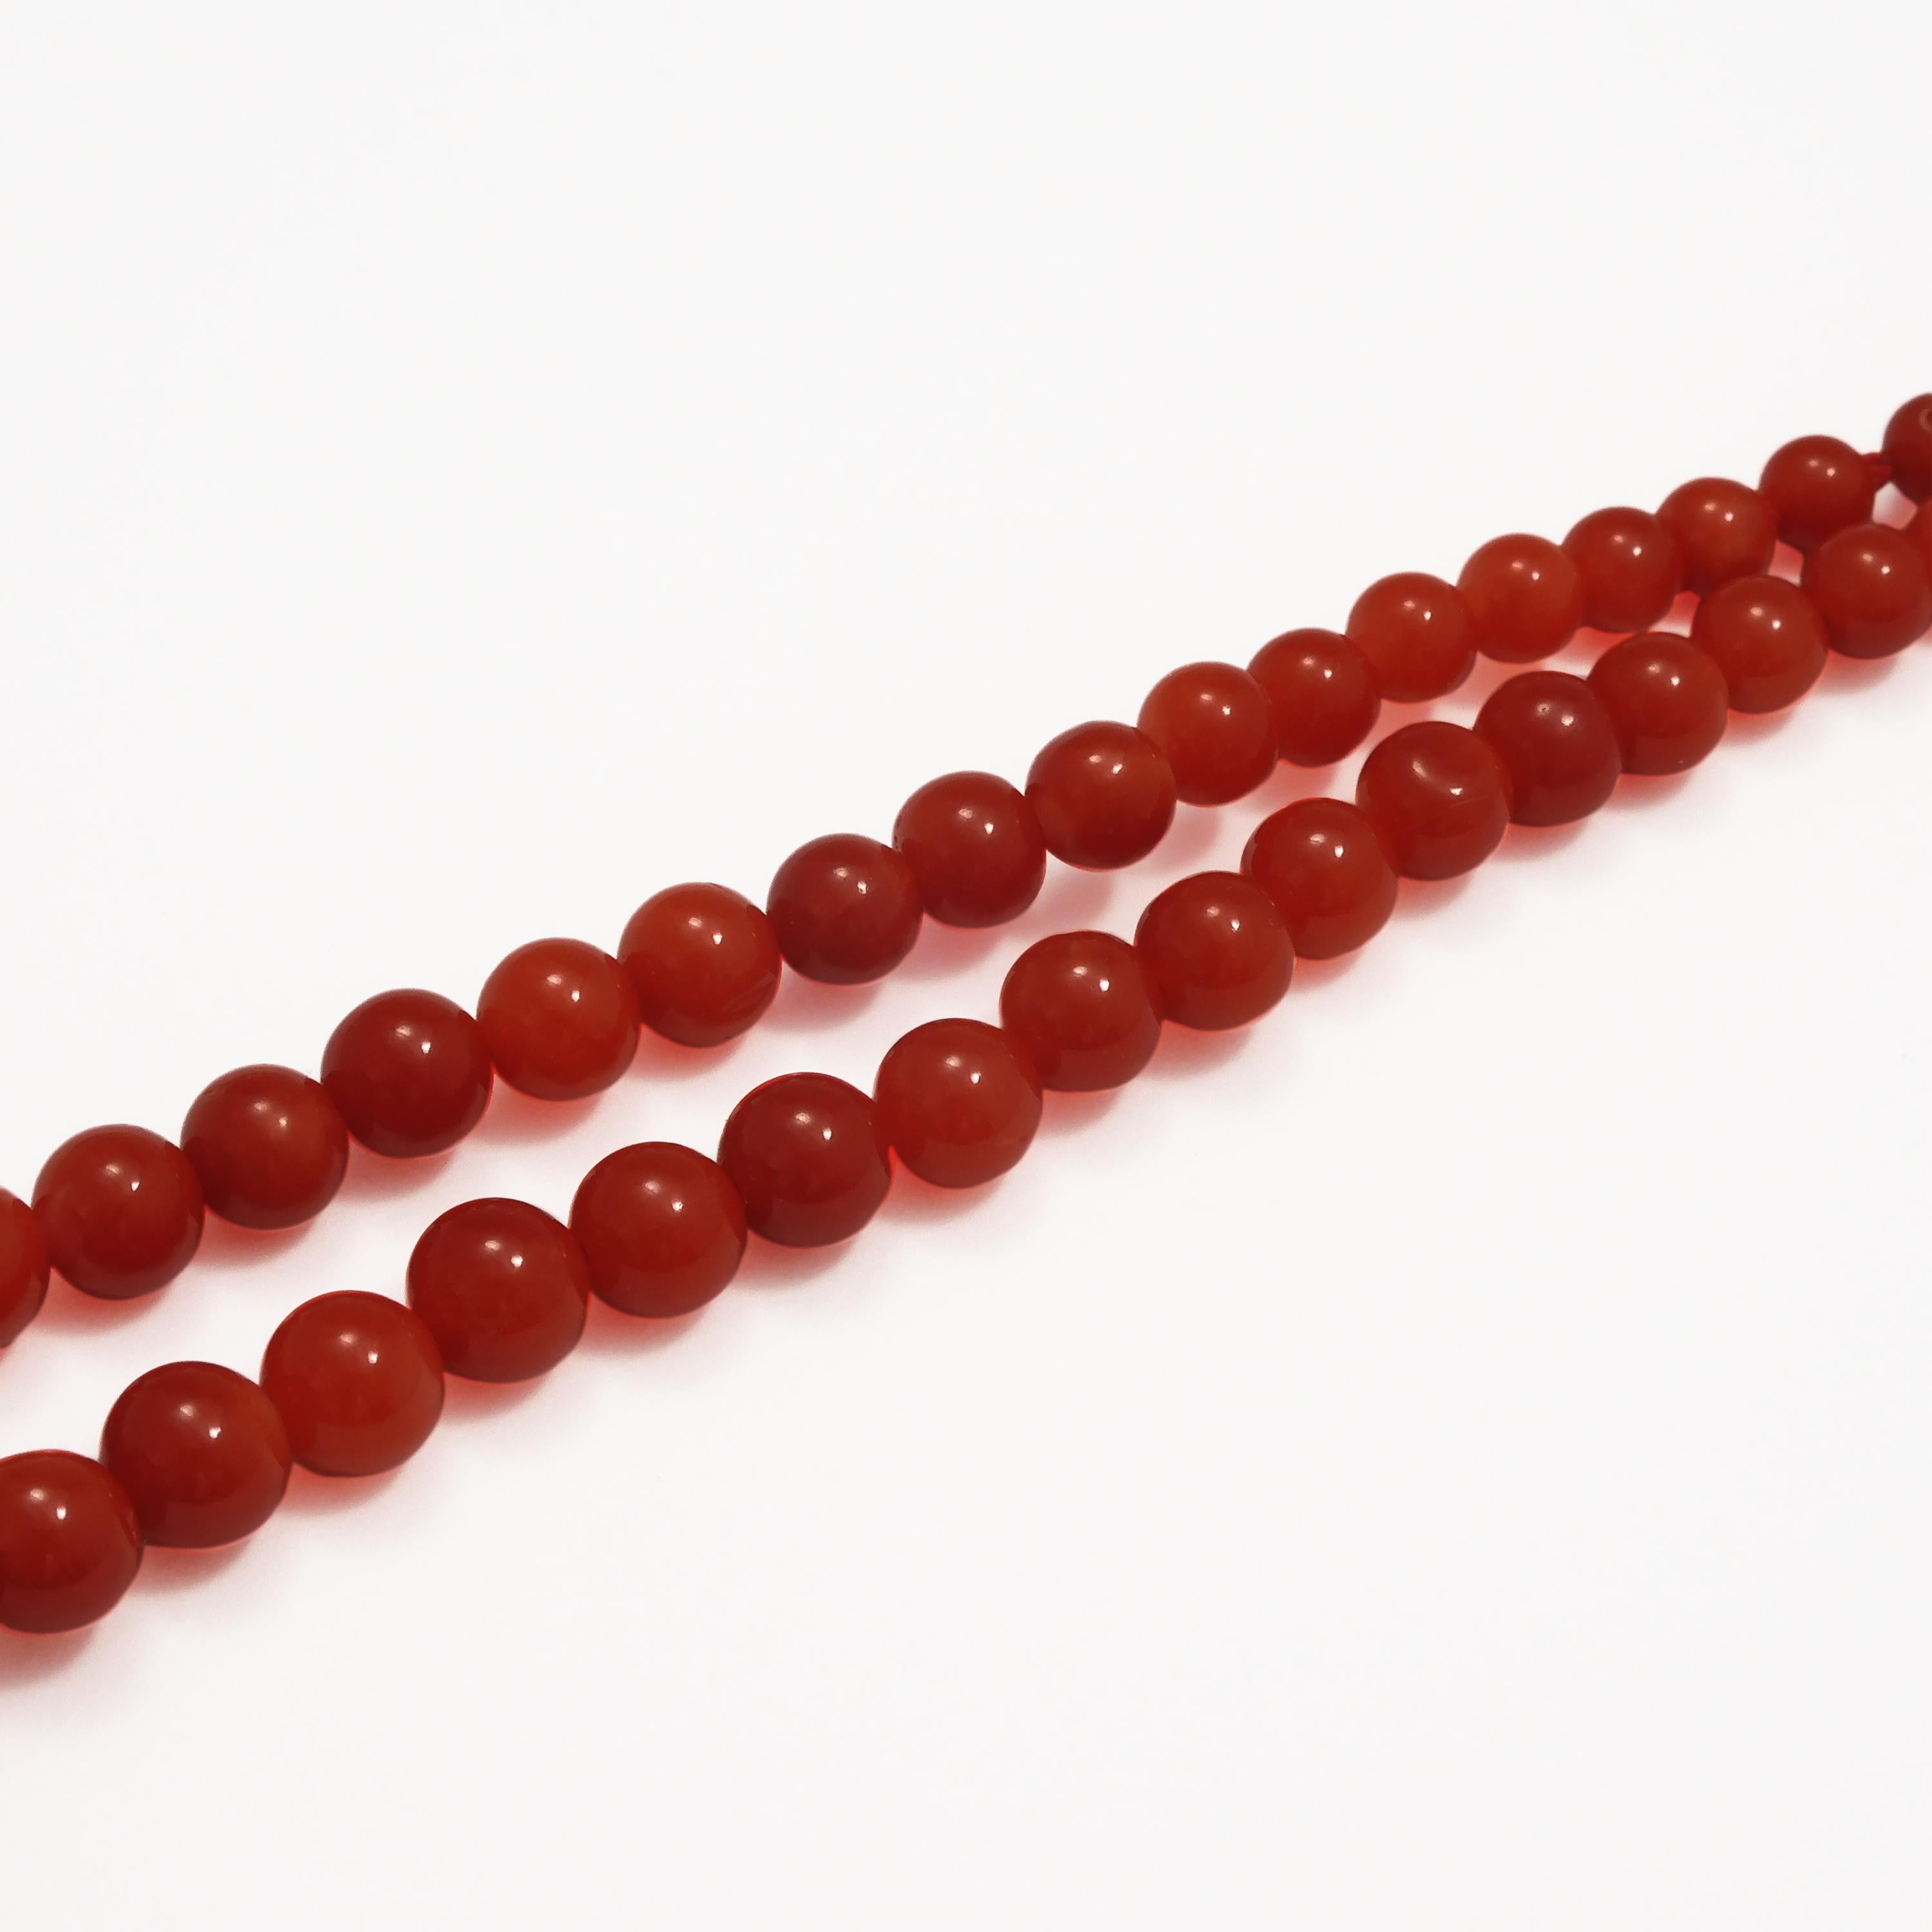 Bead 18 Karat Yellow Gold Oxblood Coral Graduated Necklace For Sale